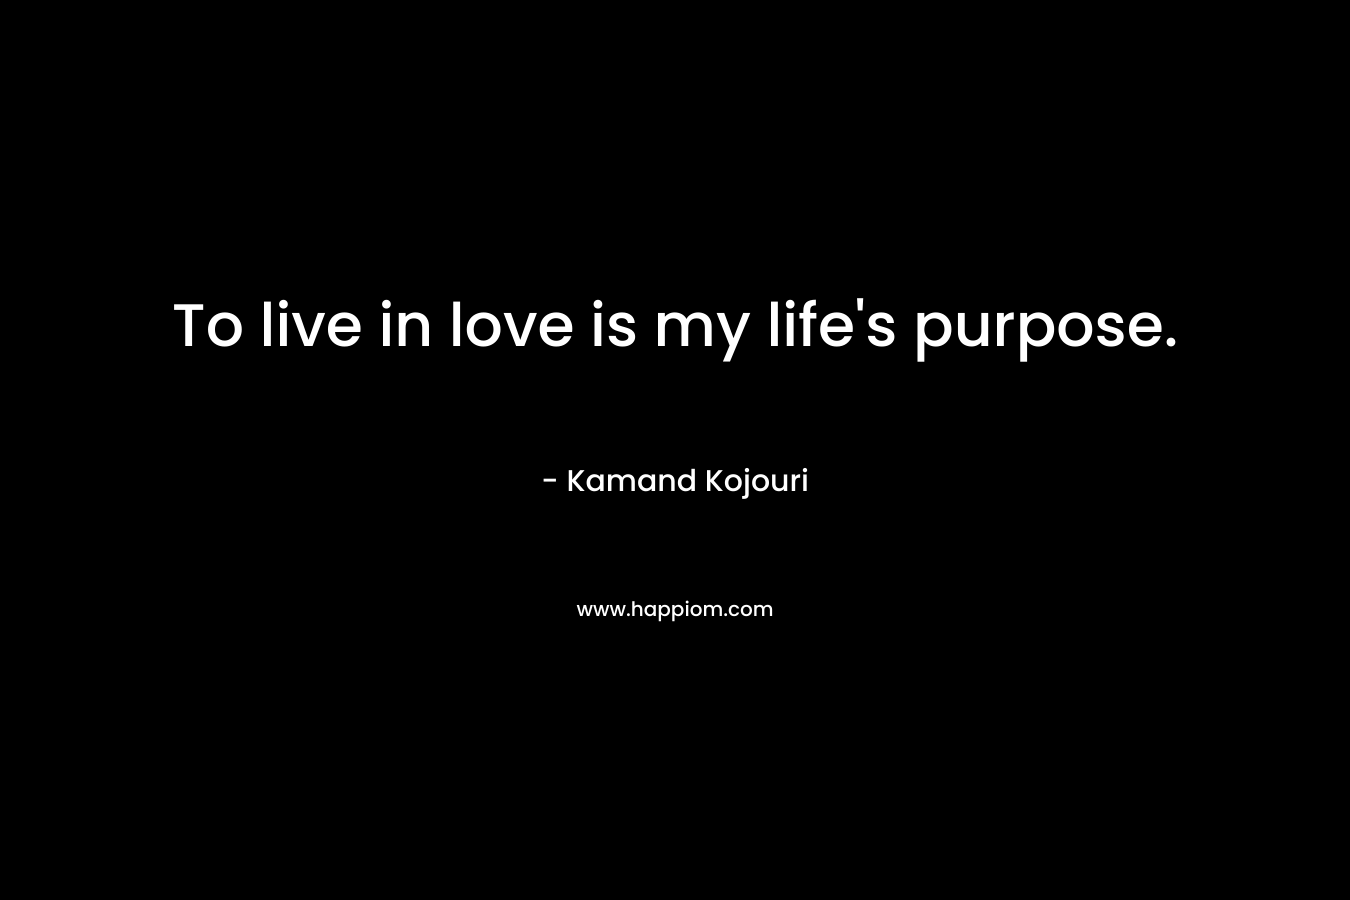 To live in love is my life's purpose.